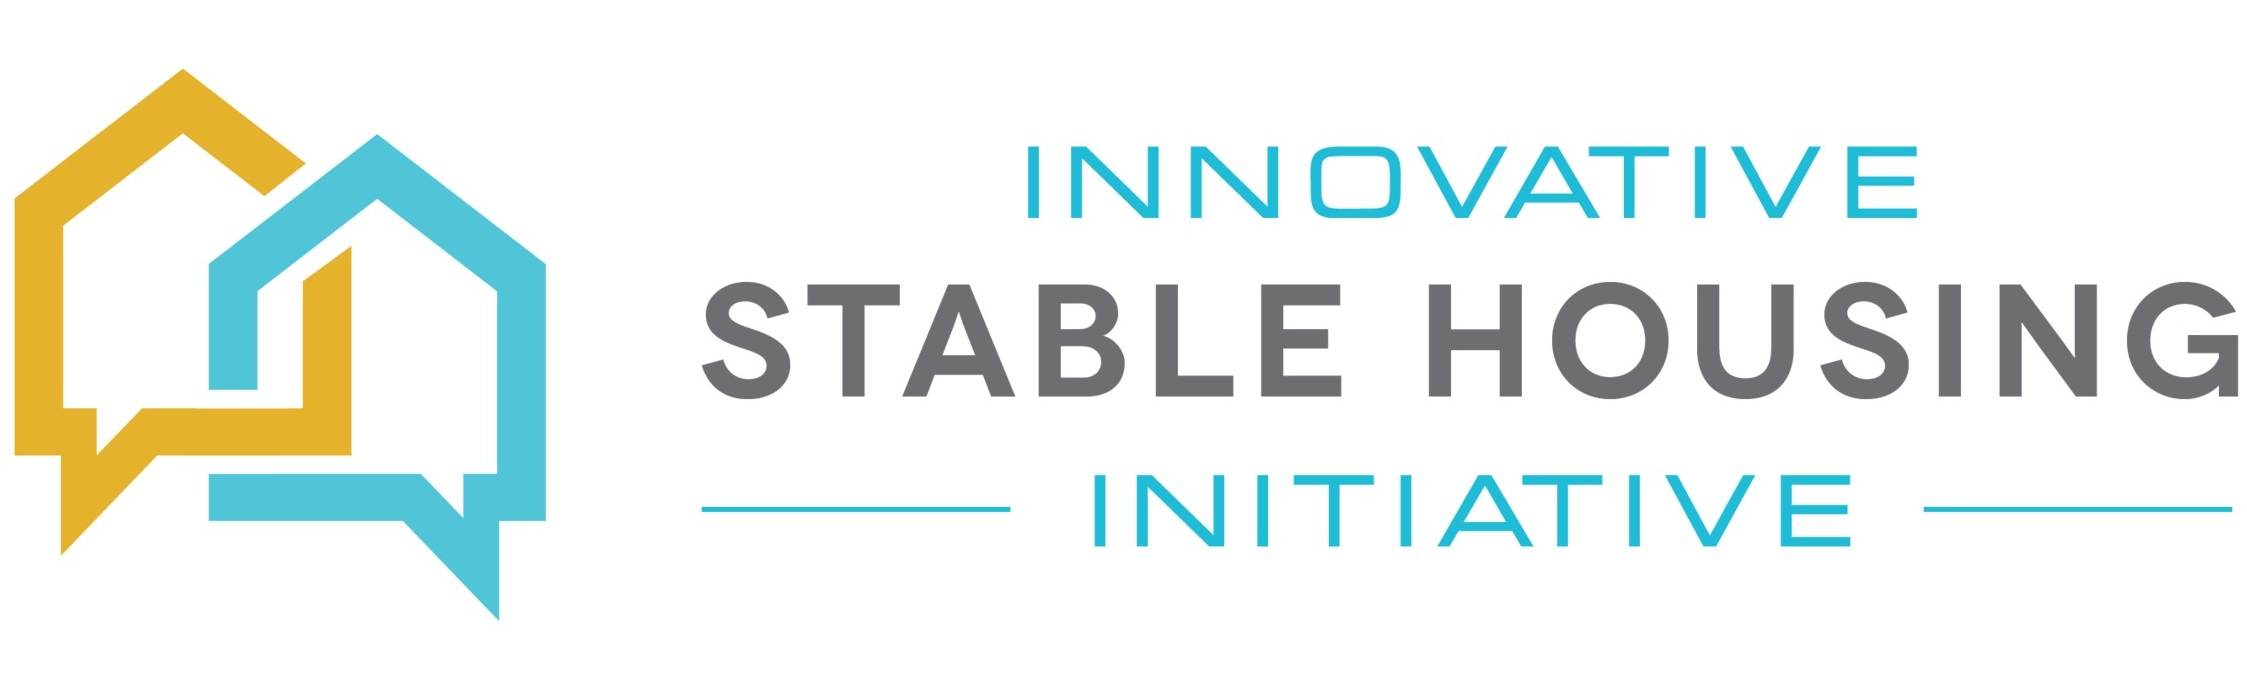 Innovative Stable Housing Initiative